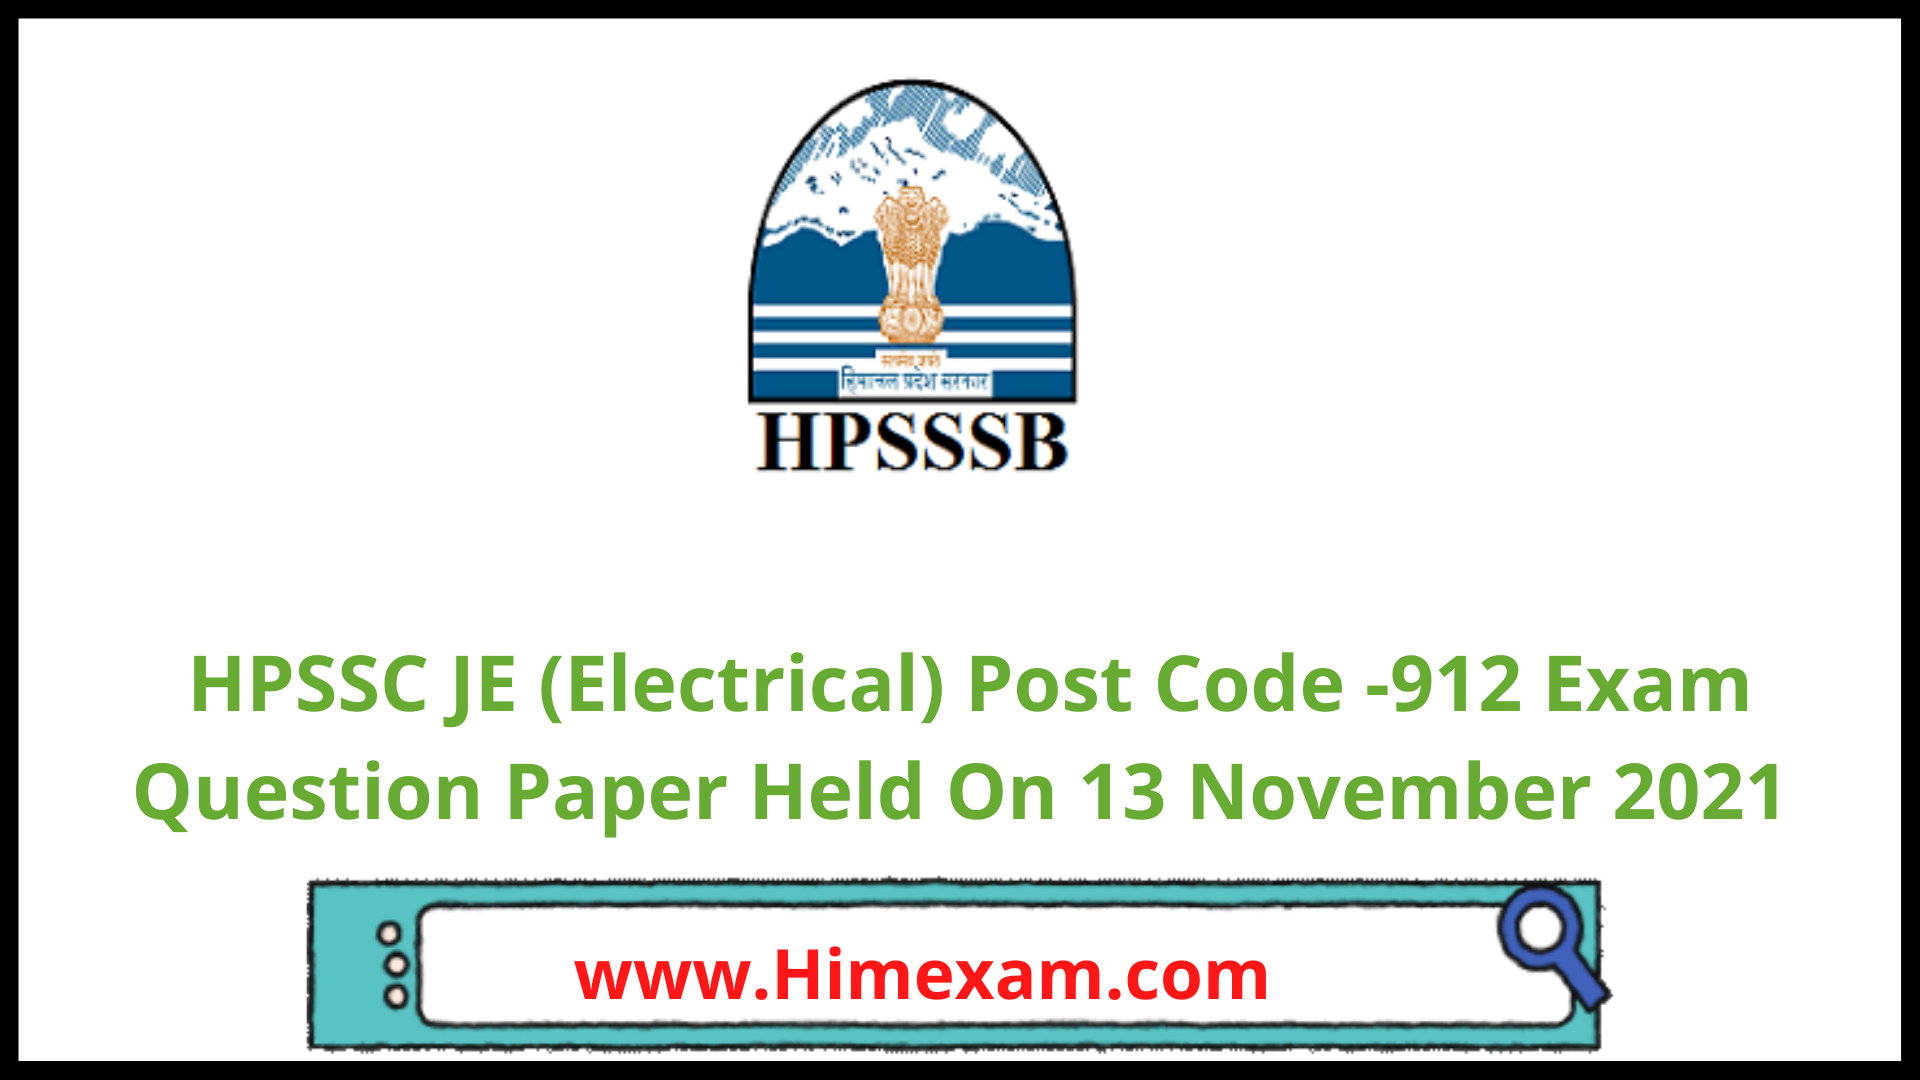 HPSSC JE (Electrical) Post Code -912 Exam Question Paper Held On 13 November 2021